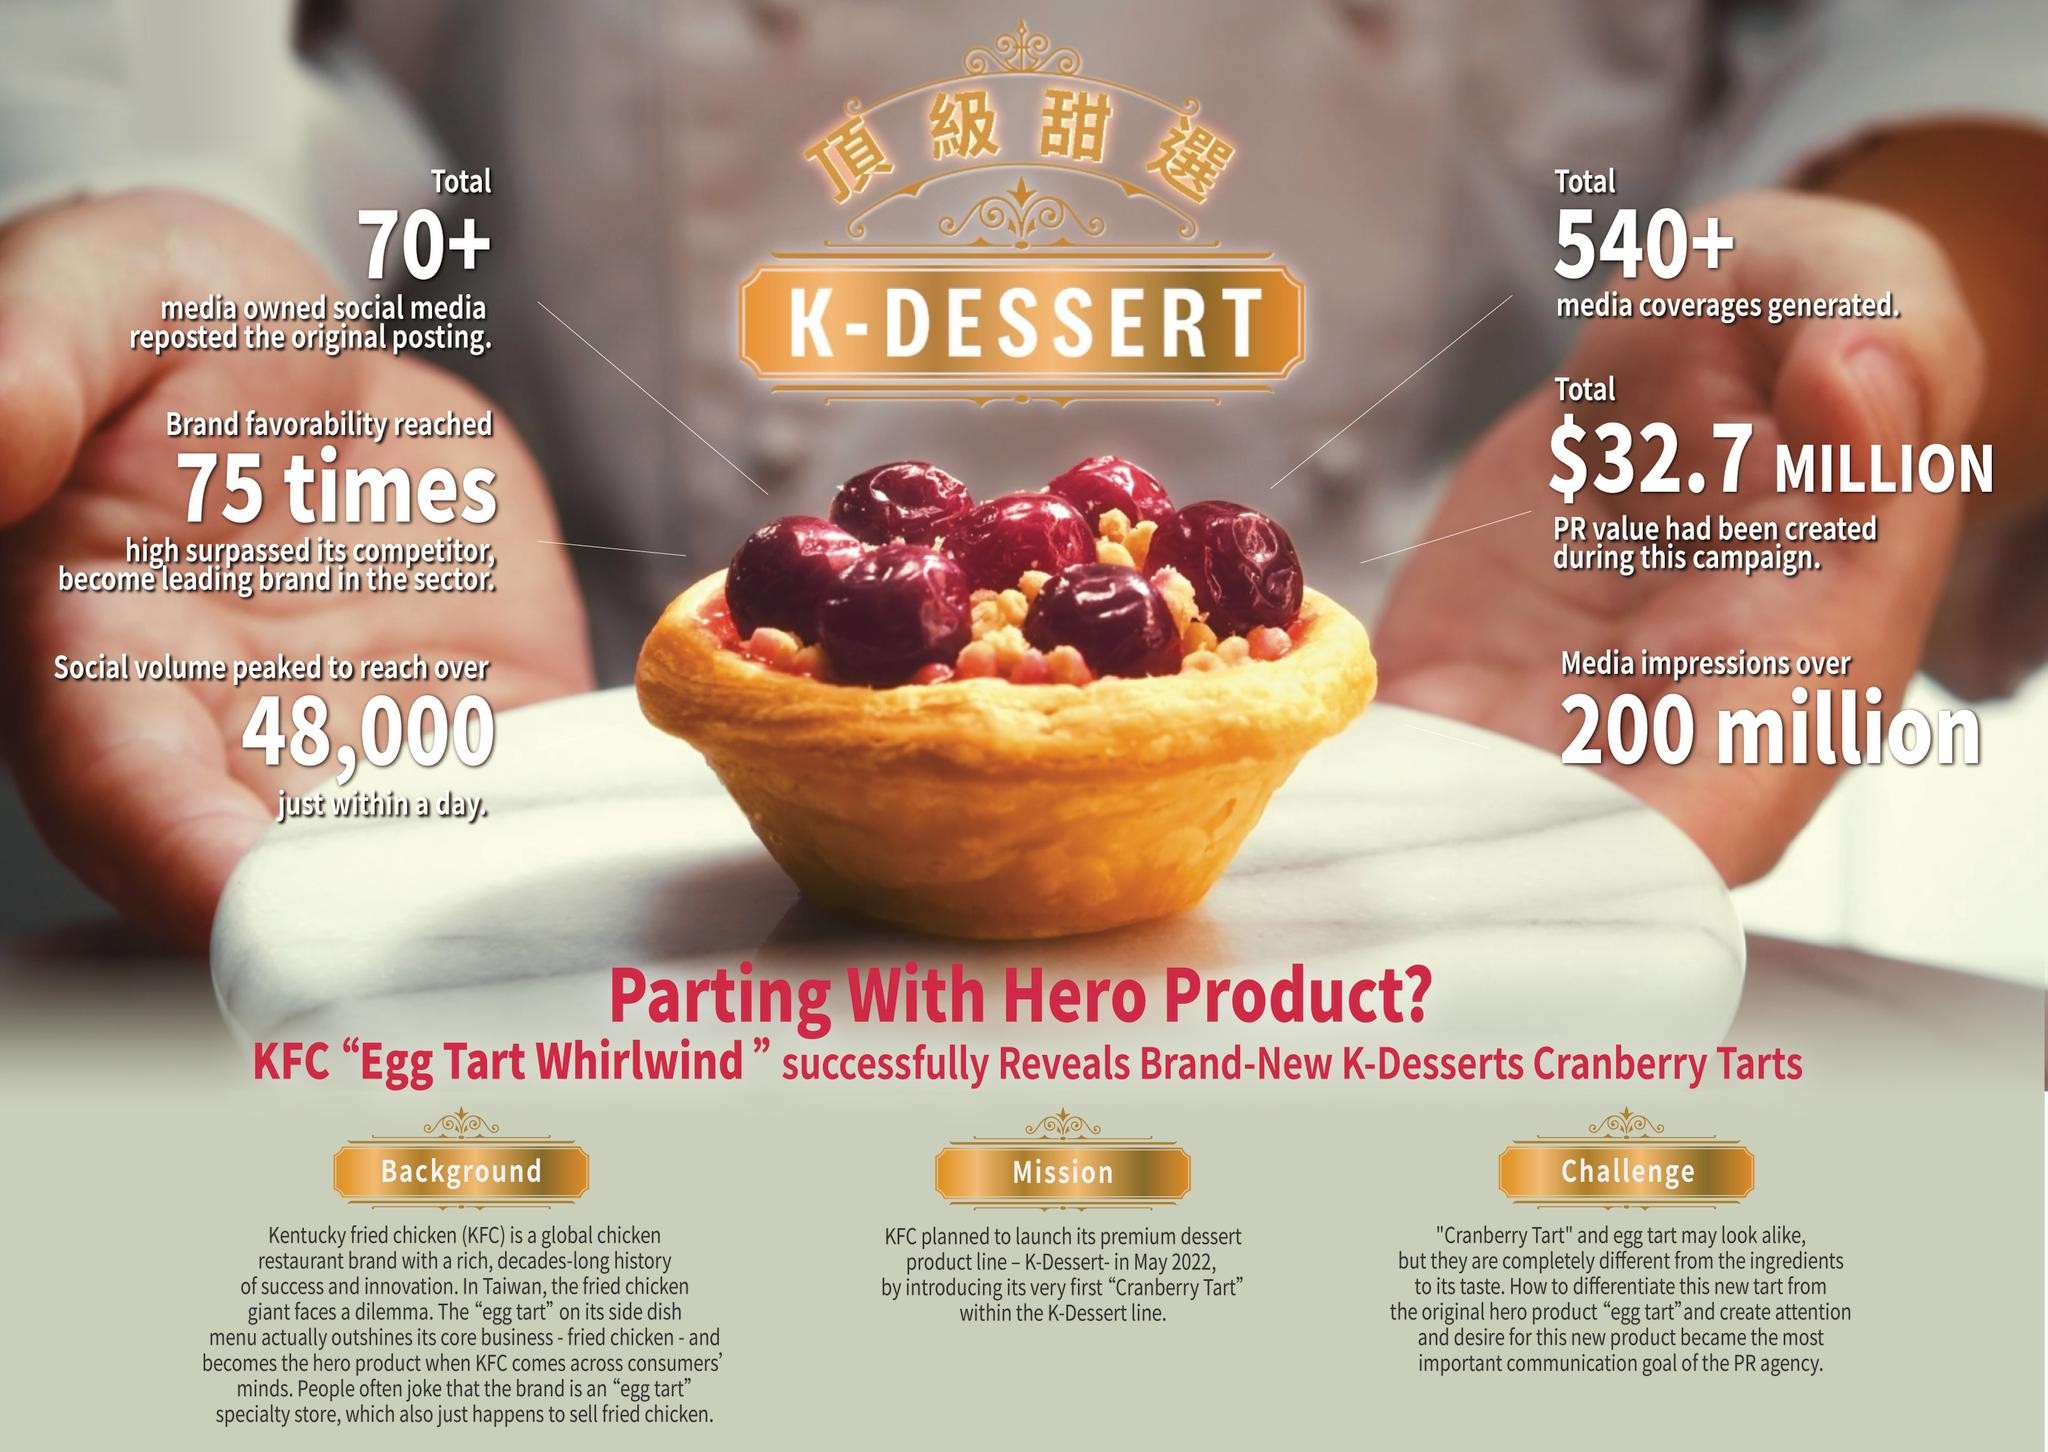 Parting With Hero Product,KFC -Egg Tart Whirlwind- successfully Reveals Brand-New K-Desserts Cranberry Tarts